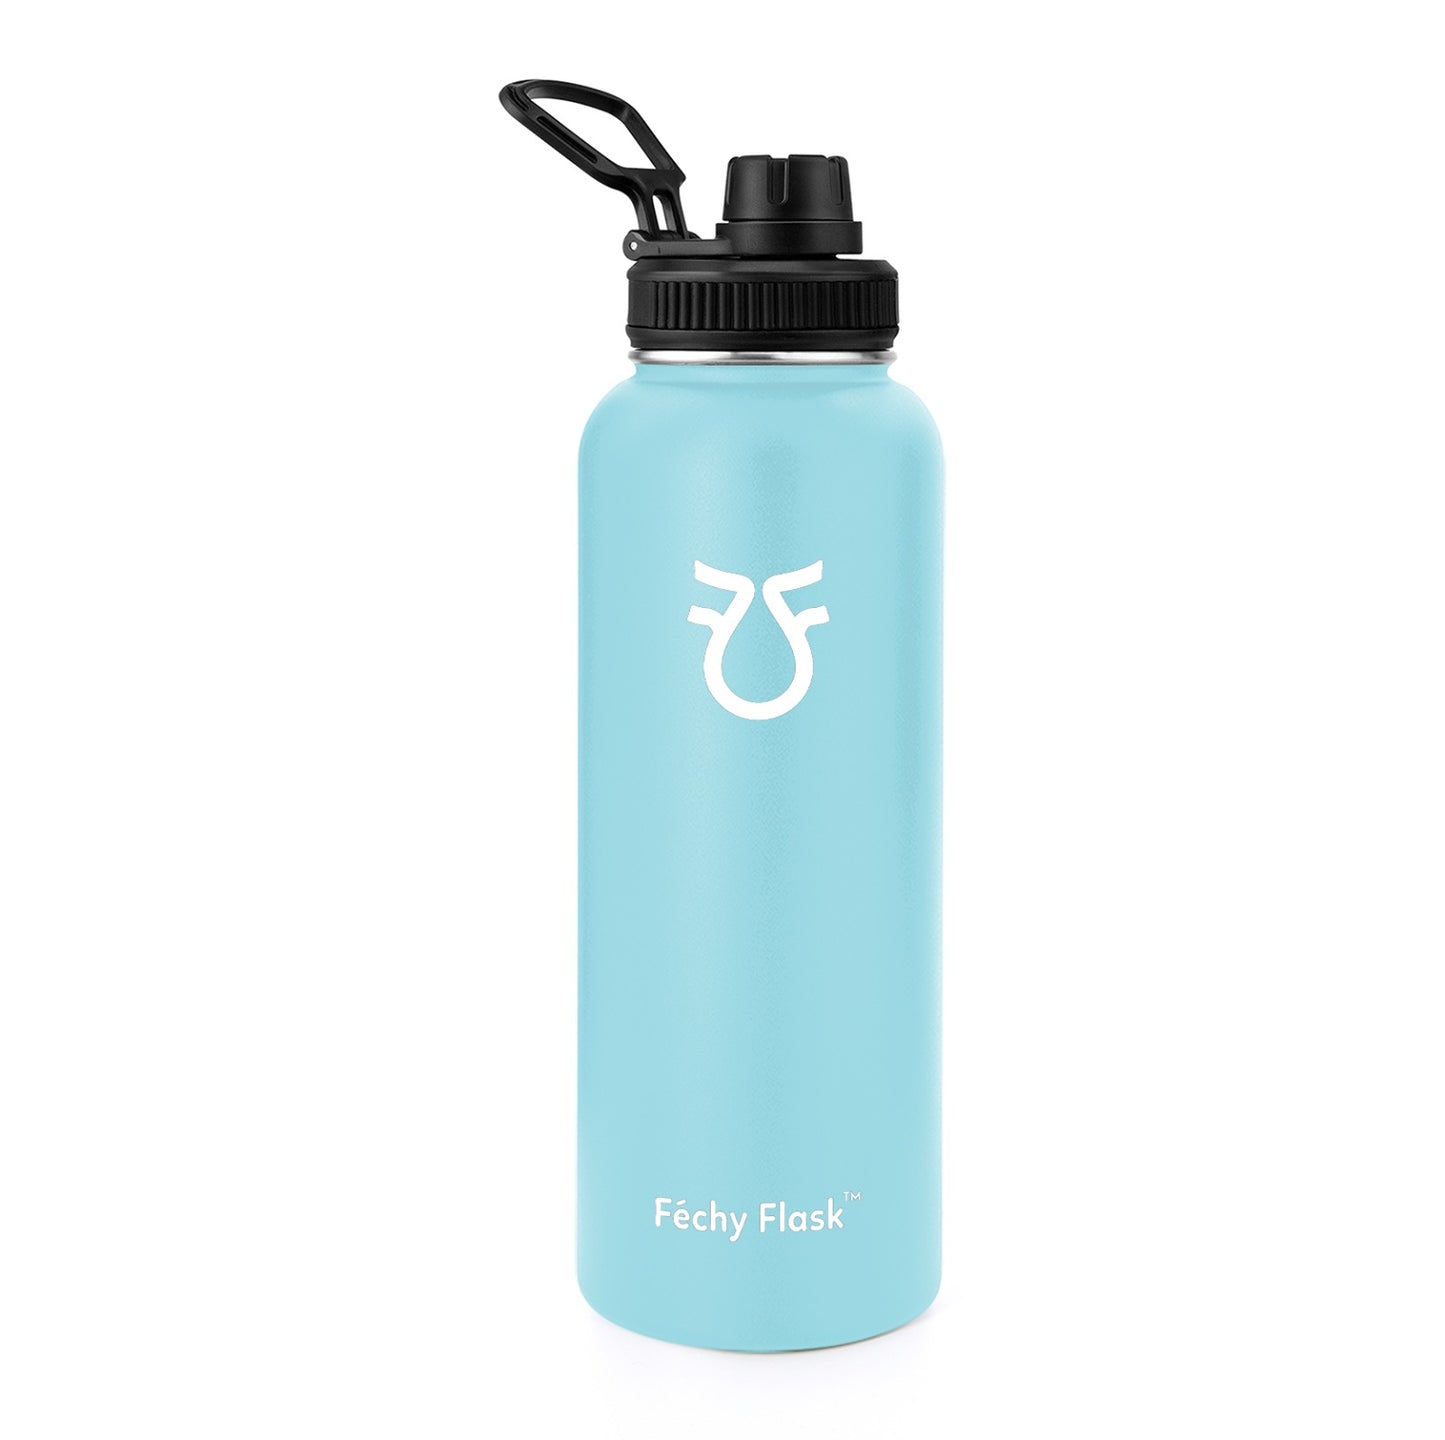 Fechy Stainless Steel insulated Drink Bottle - 1.15L - Pastel